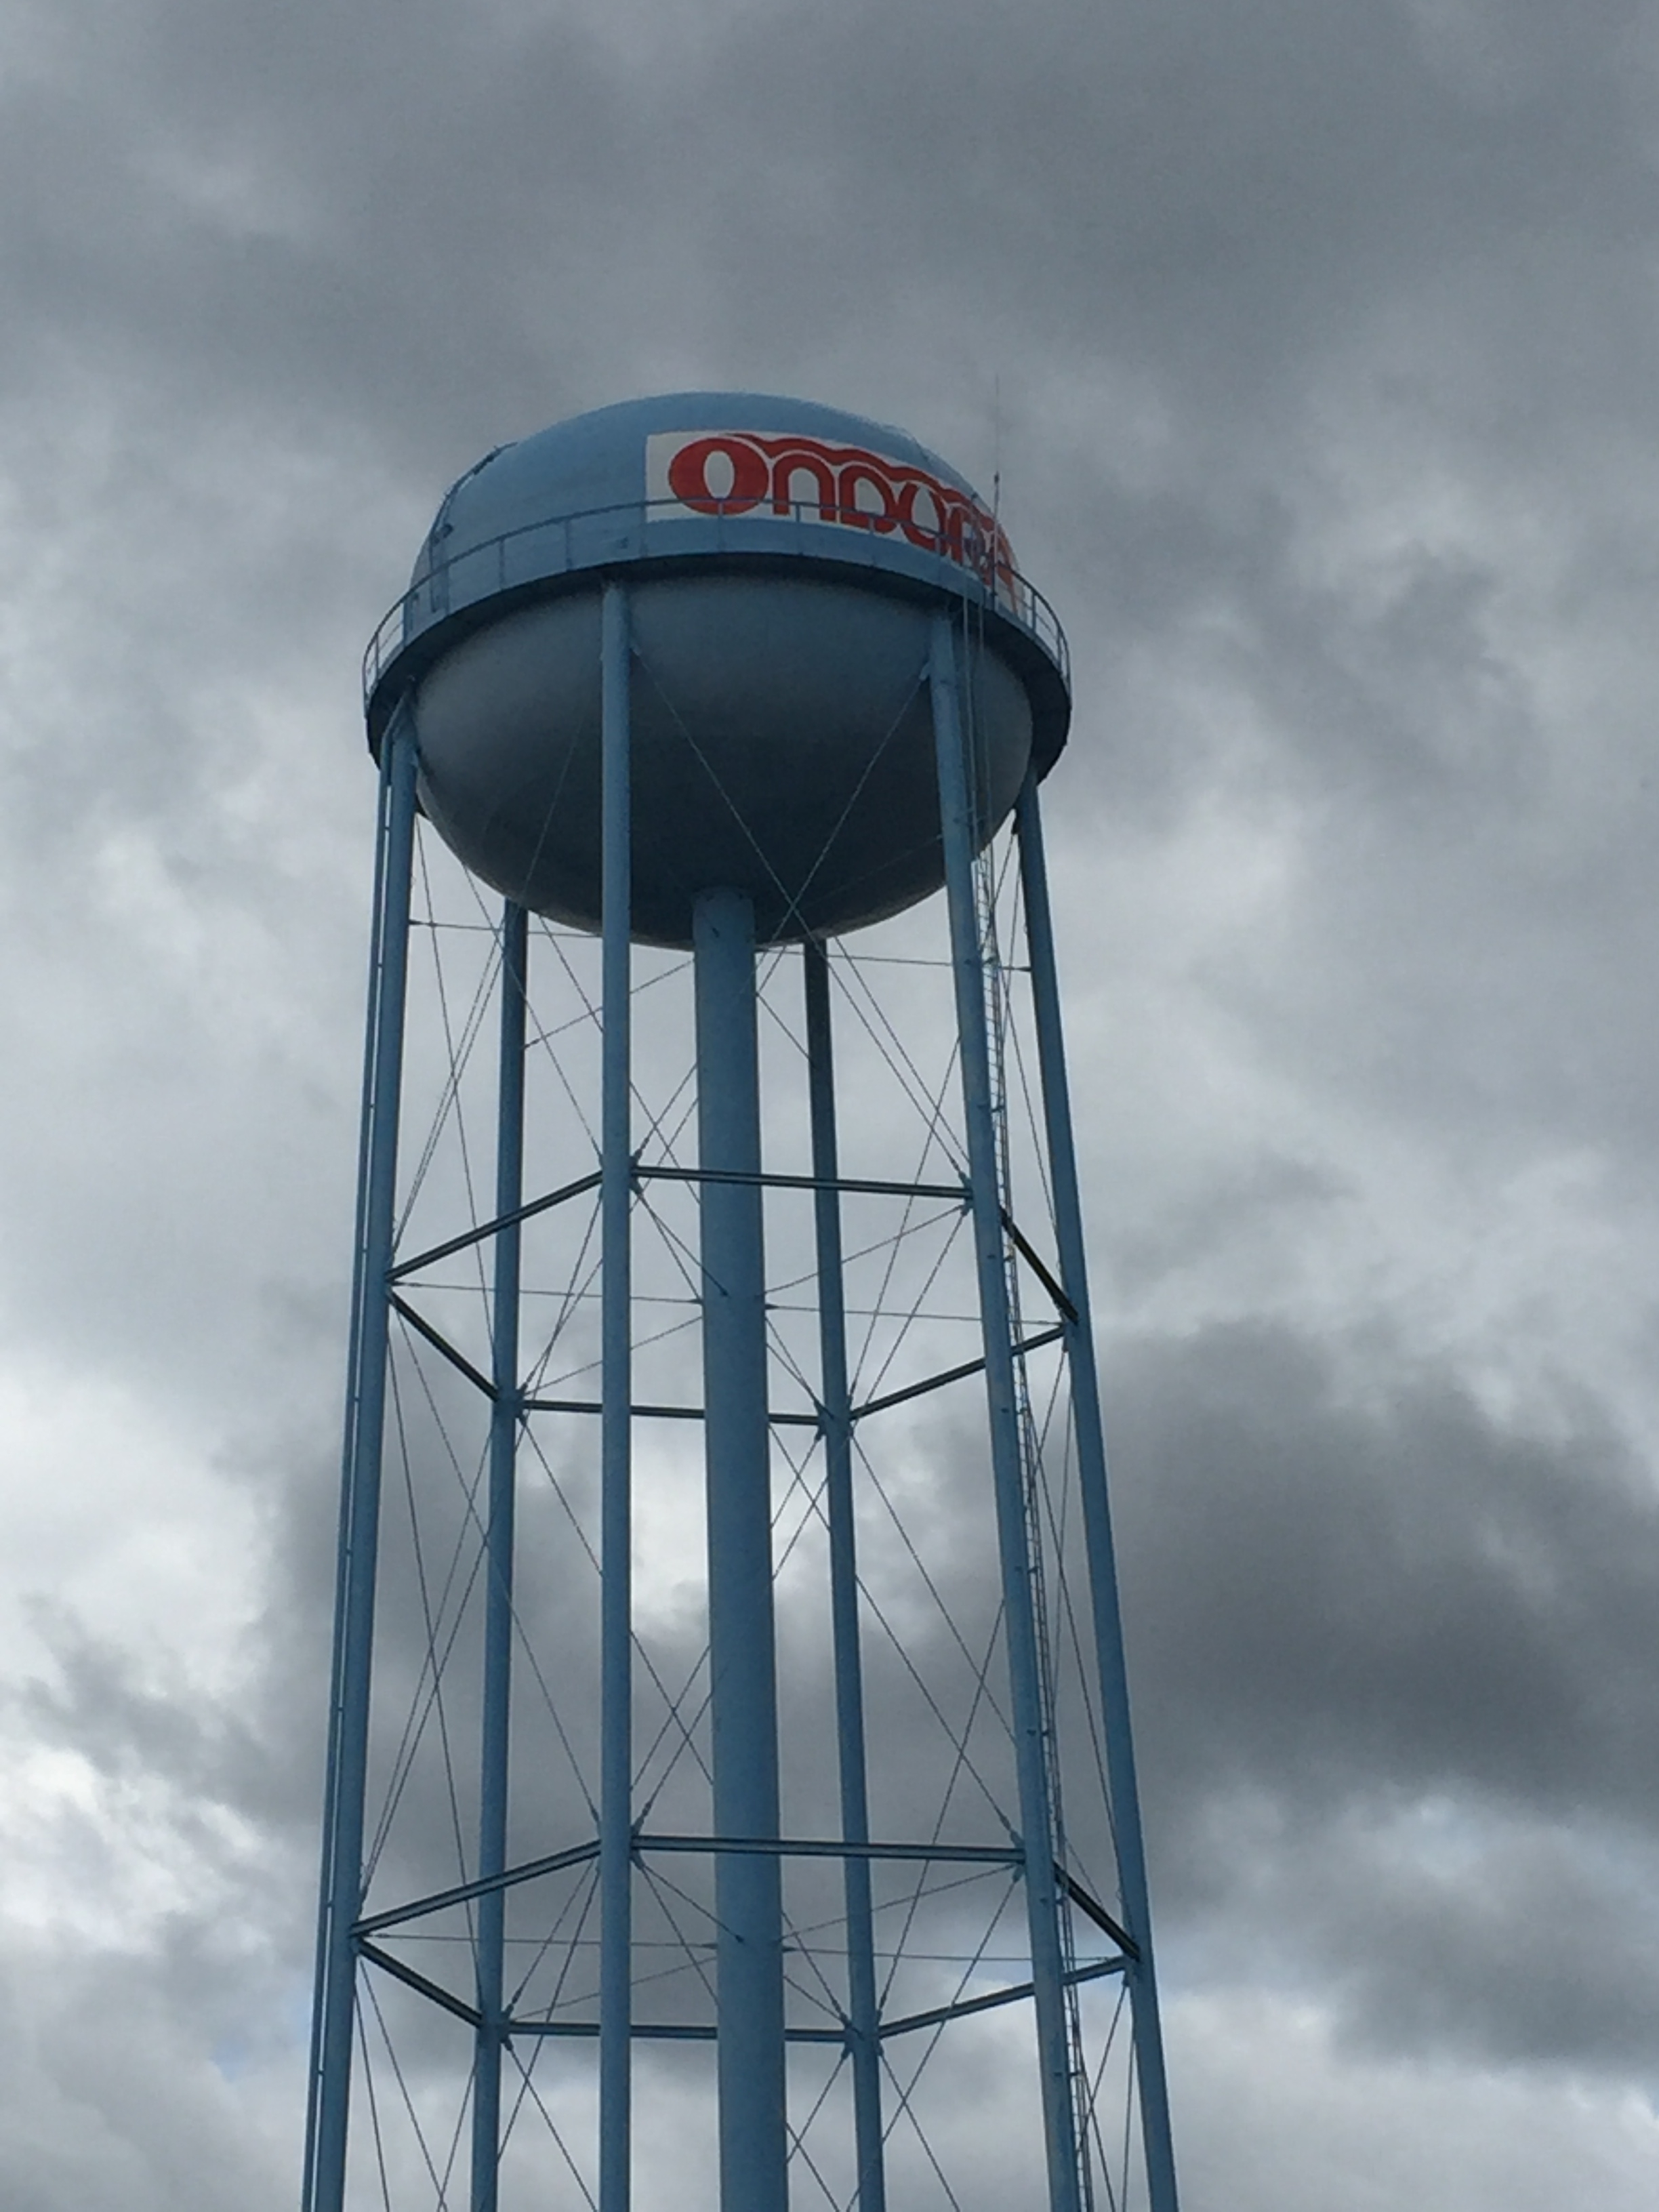 Ondura featured on the water tower